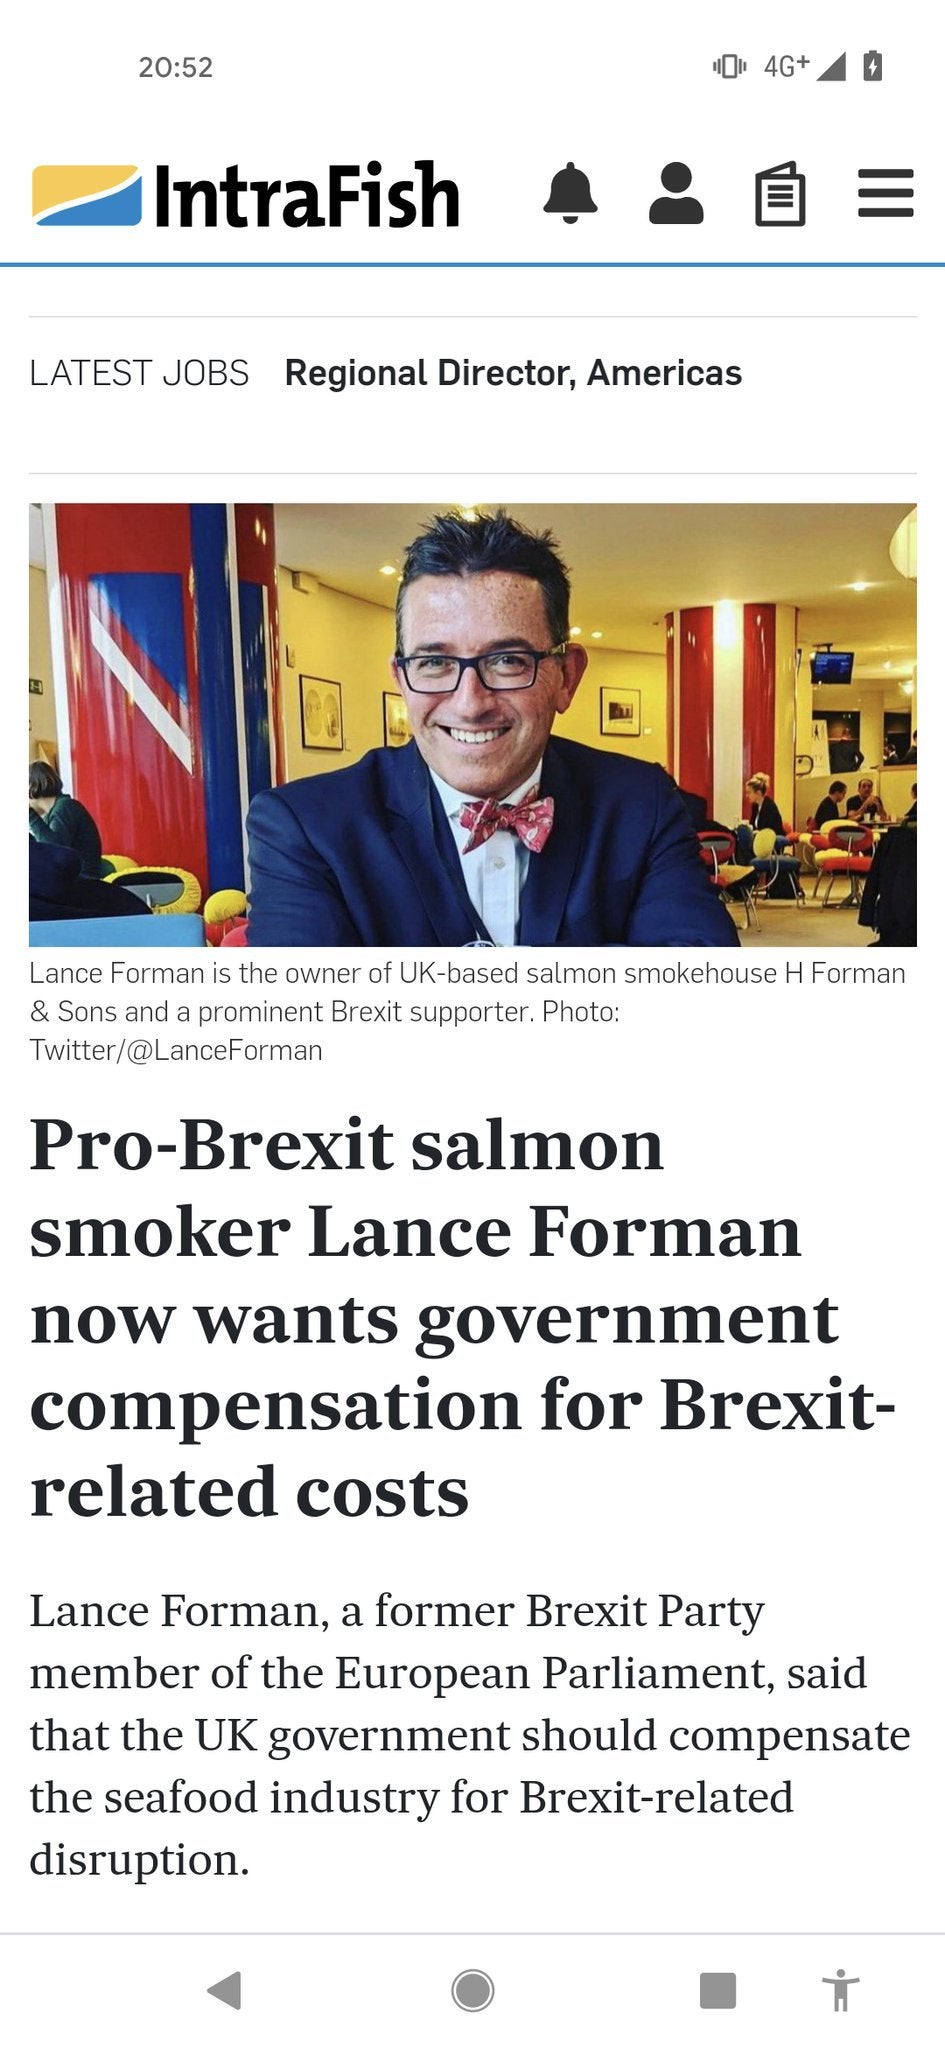 columnist - 4G IntraFish Iii Latest Jobs Regional Director, Americas Lance Forman is the owner of Ukbased salmon smokehouse H Forman & Sons and a prominent Brexit supporter. Photo Twitter ProBrexit salmon smoker Lance Forman now wants government compensat